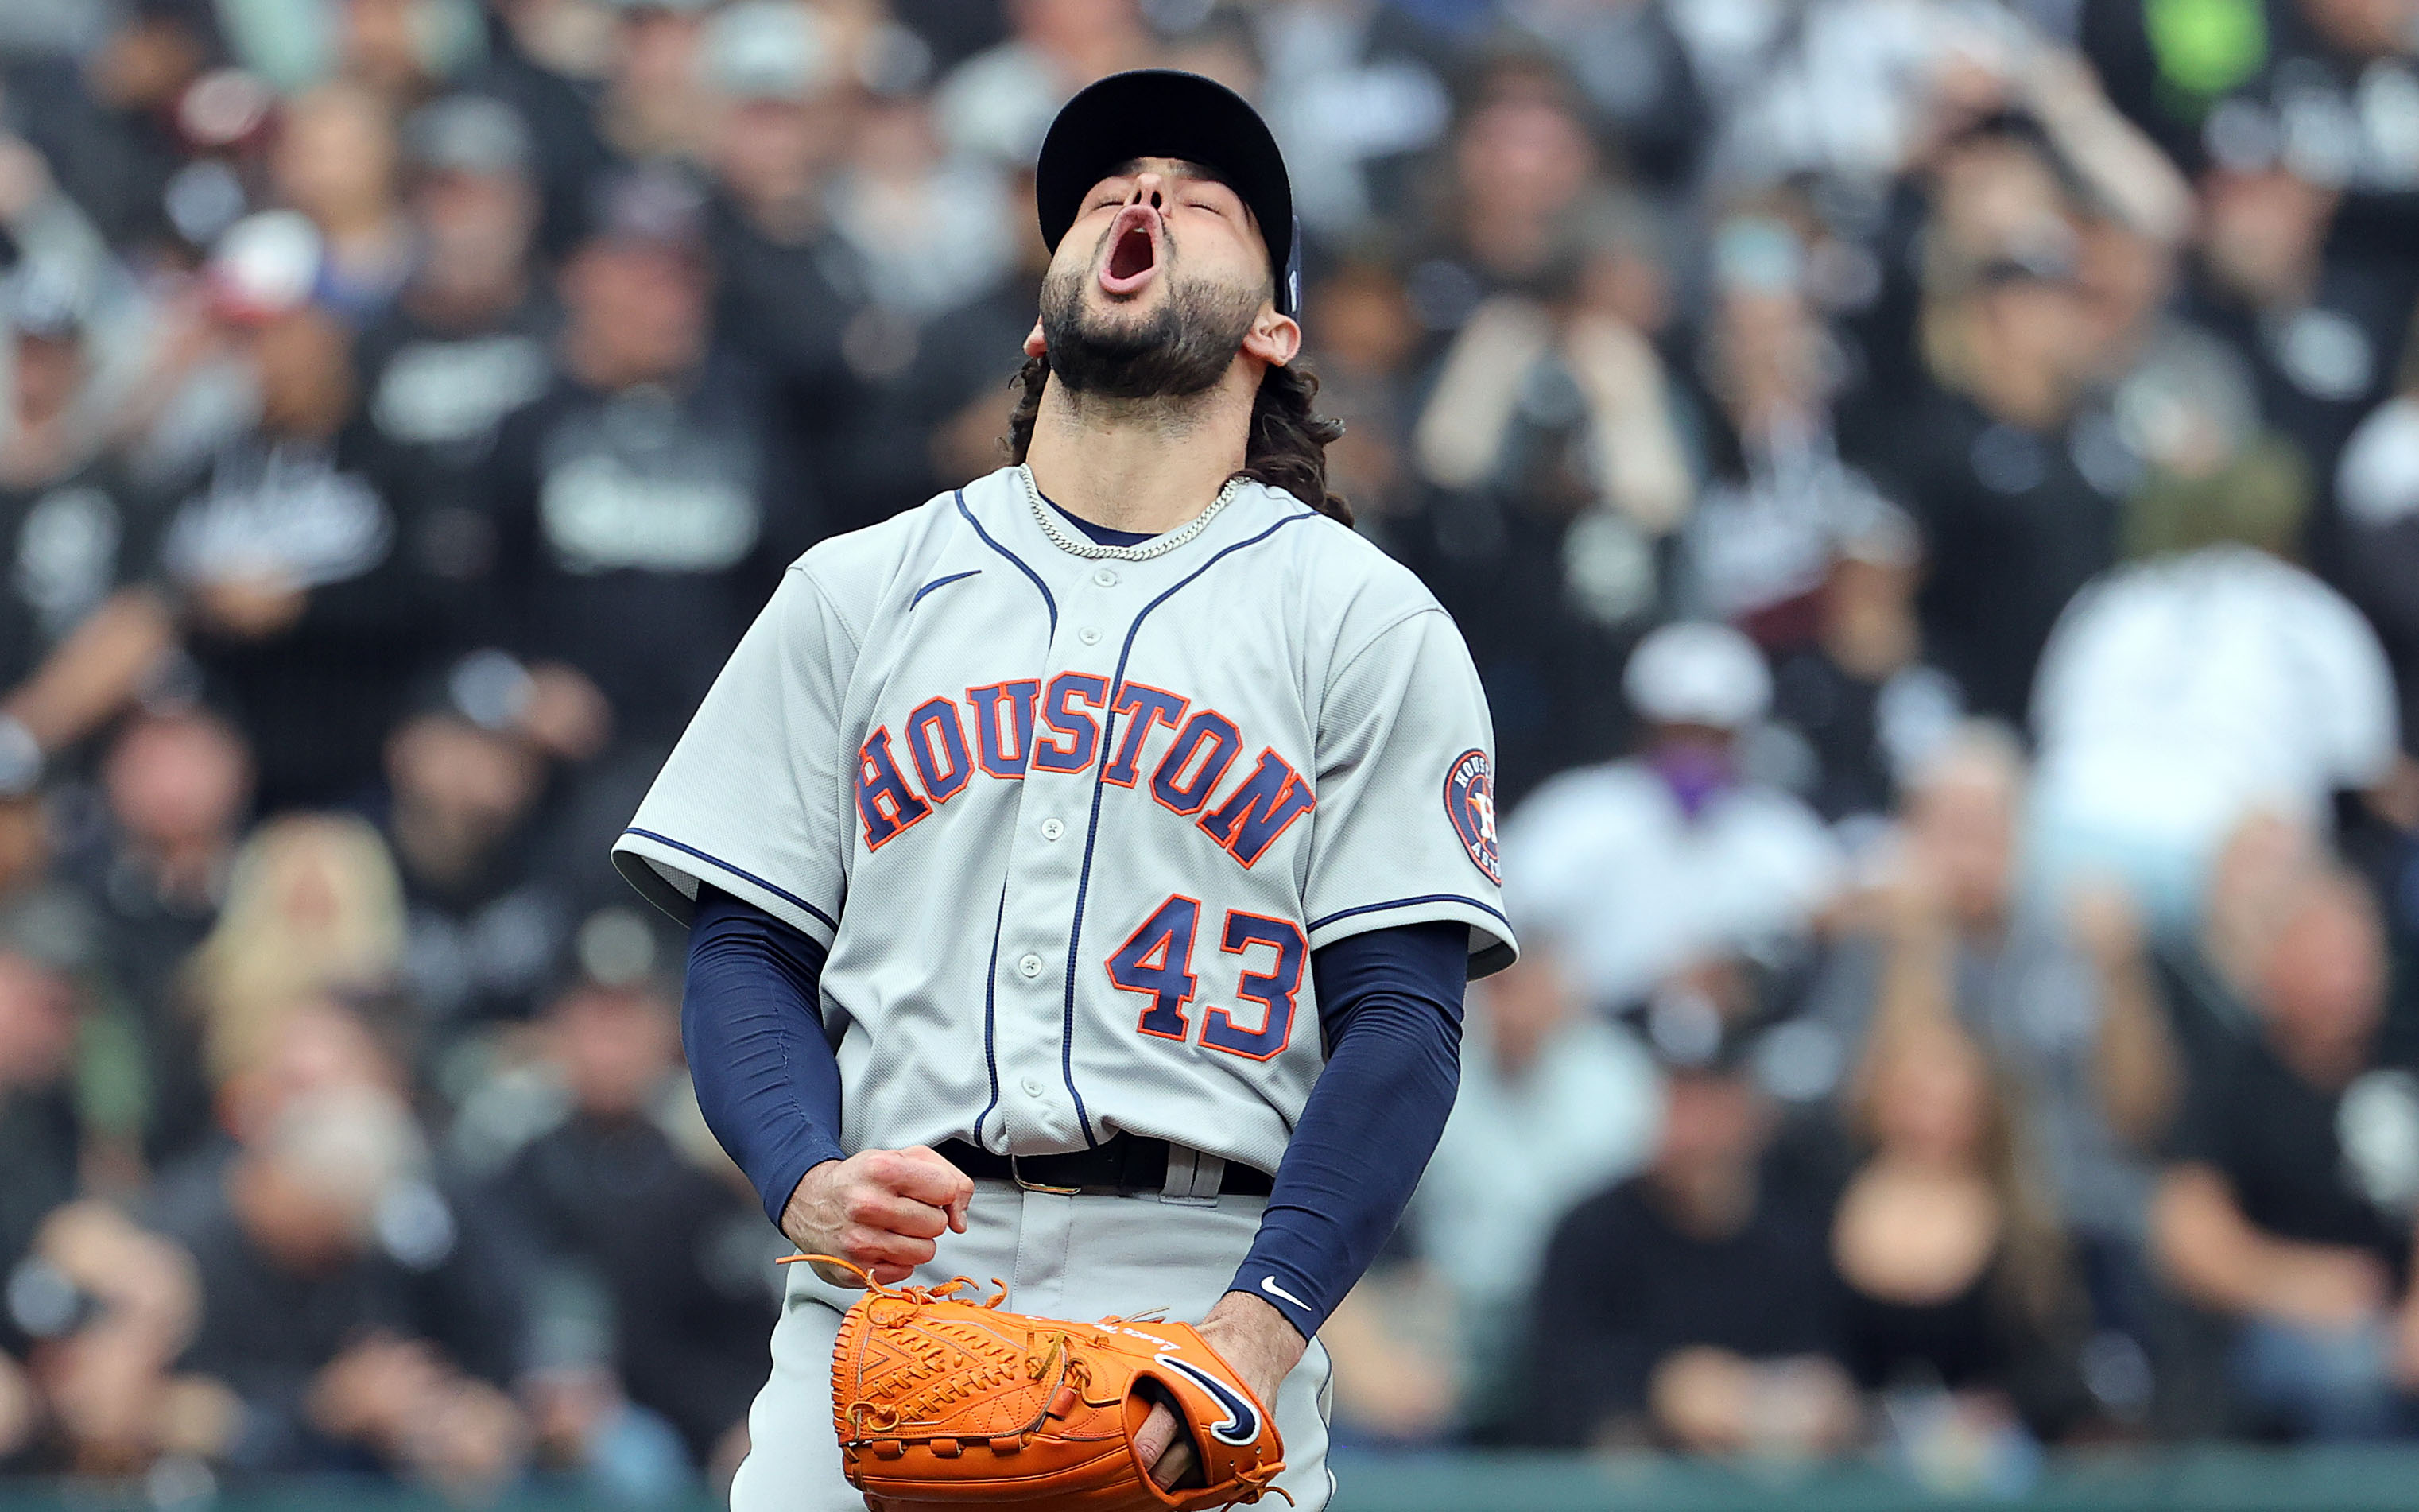 Astros' Jose Altuve gets nicked by pitch, booed in spring debut